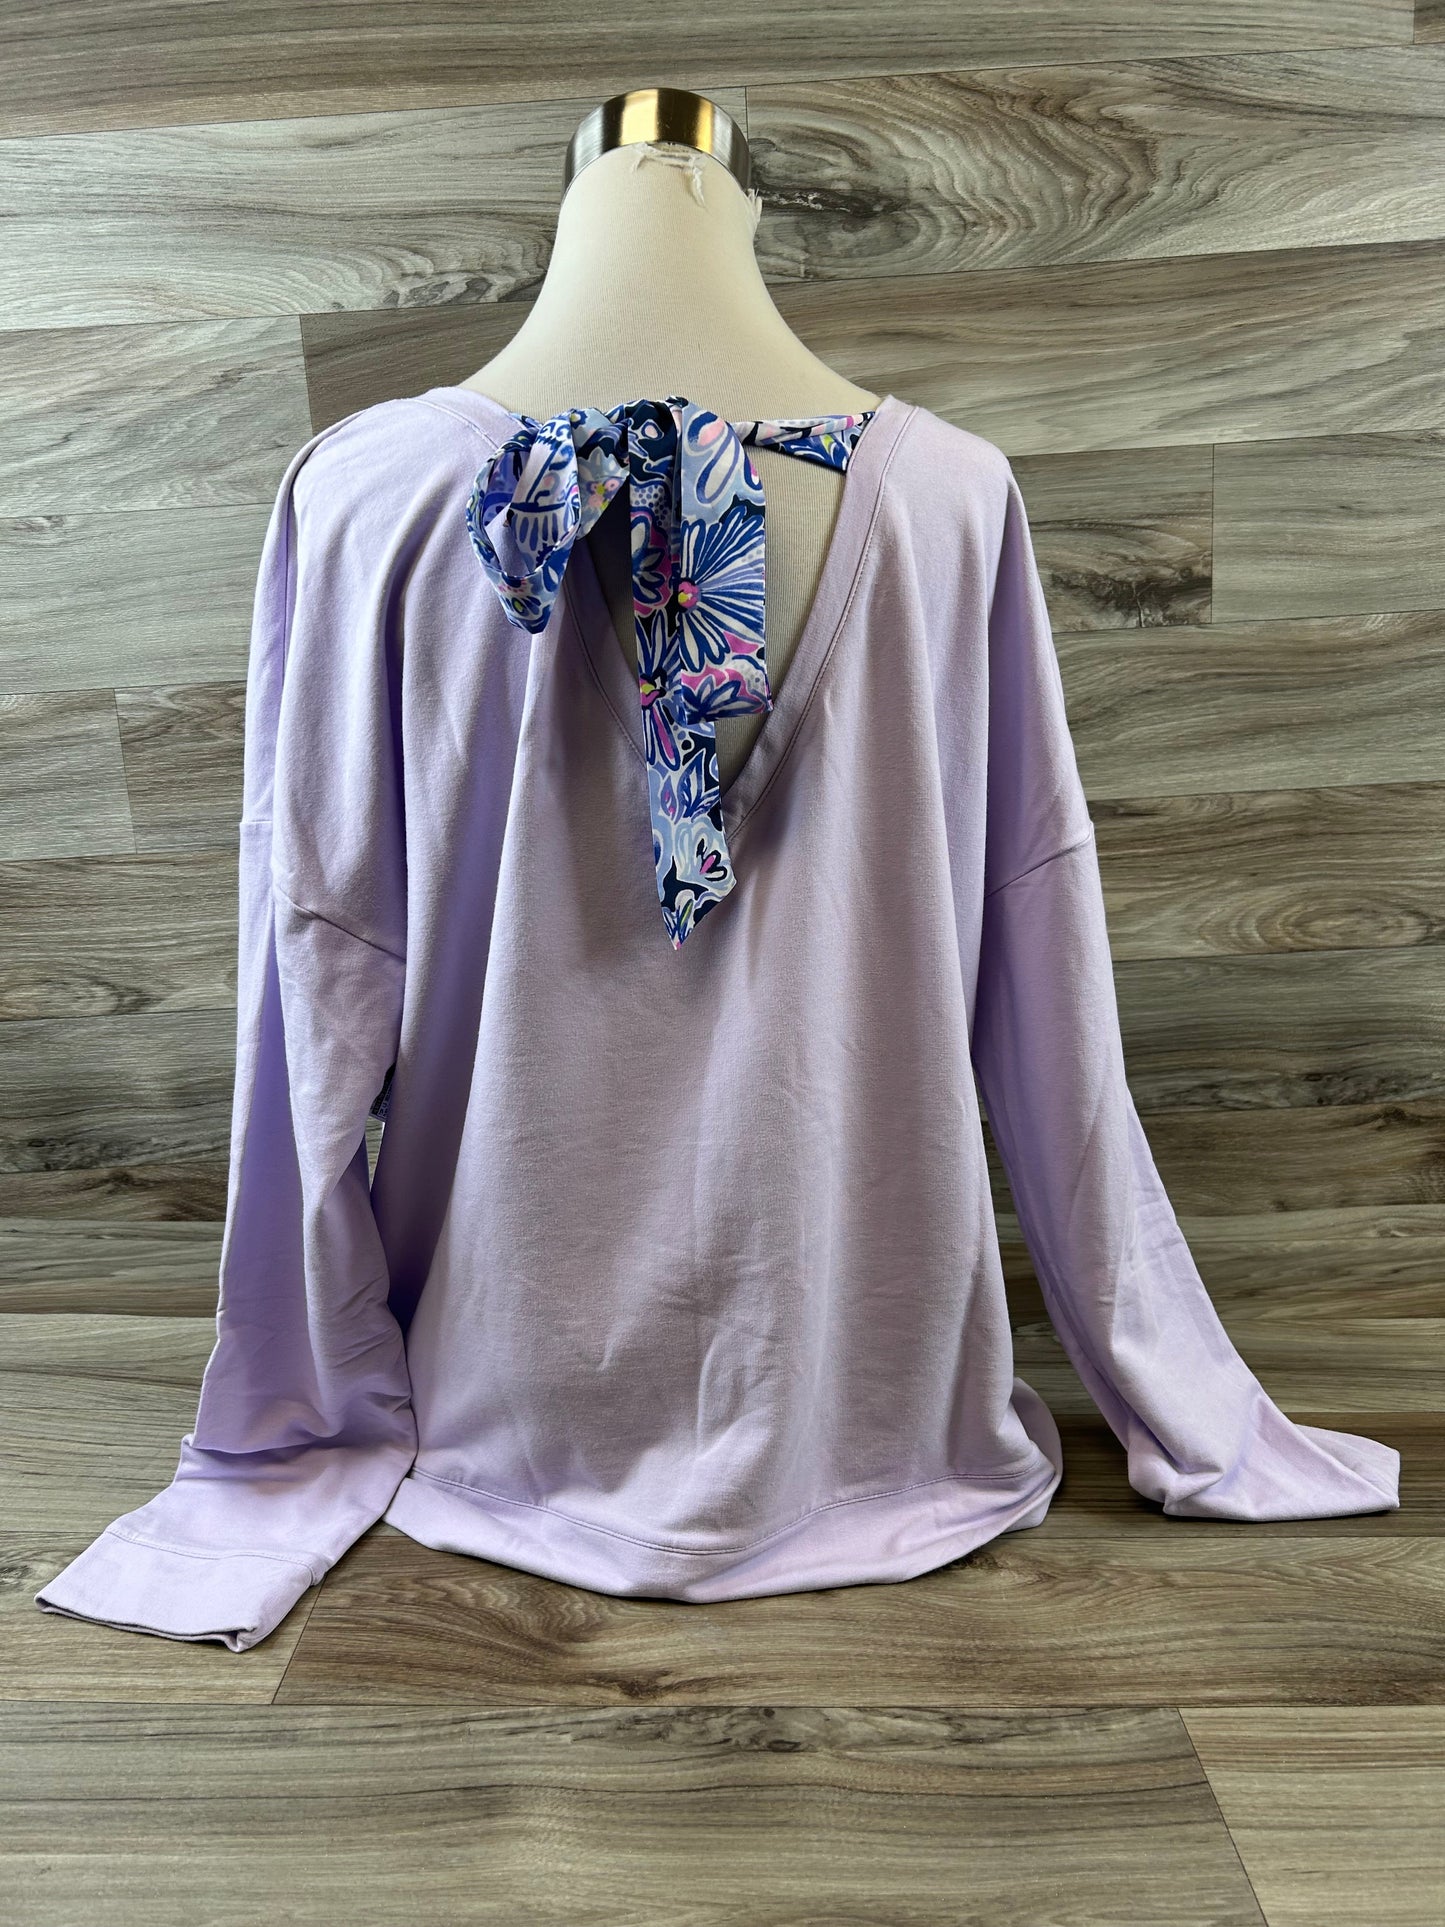 Purple Top Long Sleeve Designer Lilly Pulitzer, Size Xl